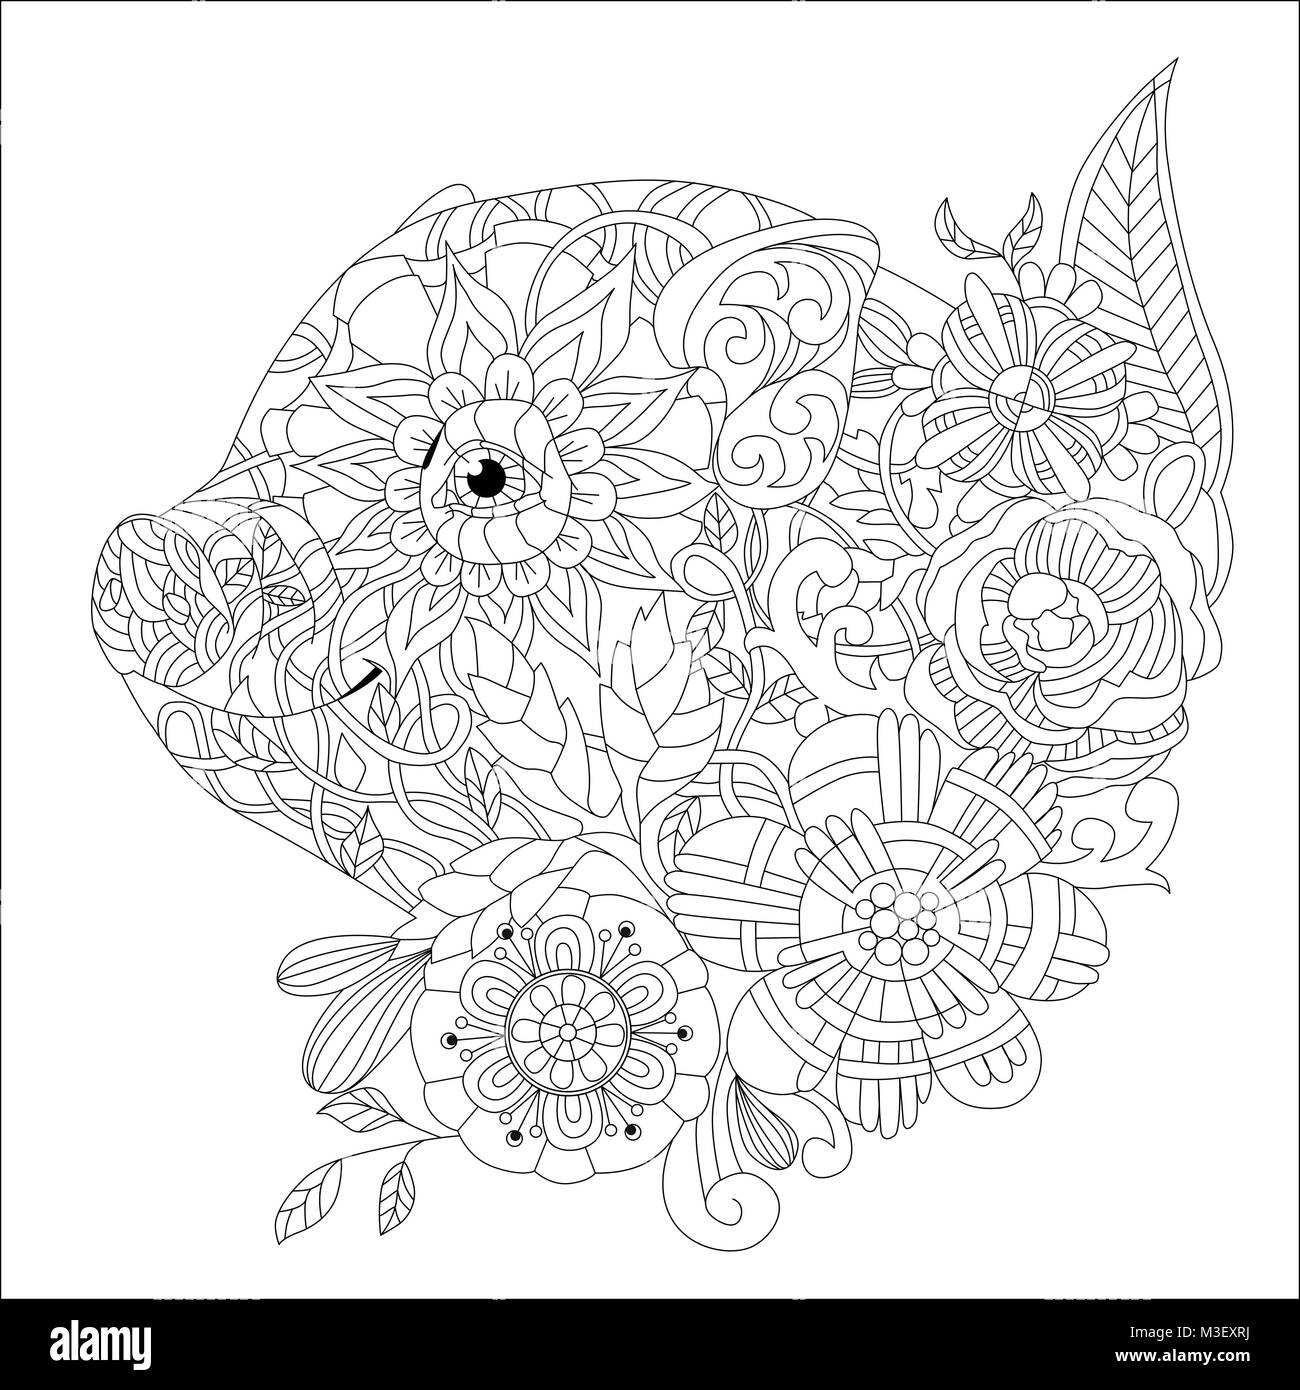 Piggy with flowers coloring book for adults vector Stock Vector